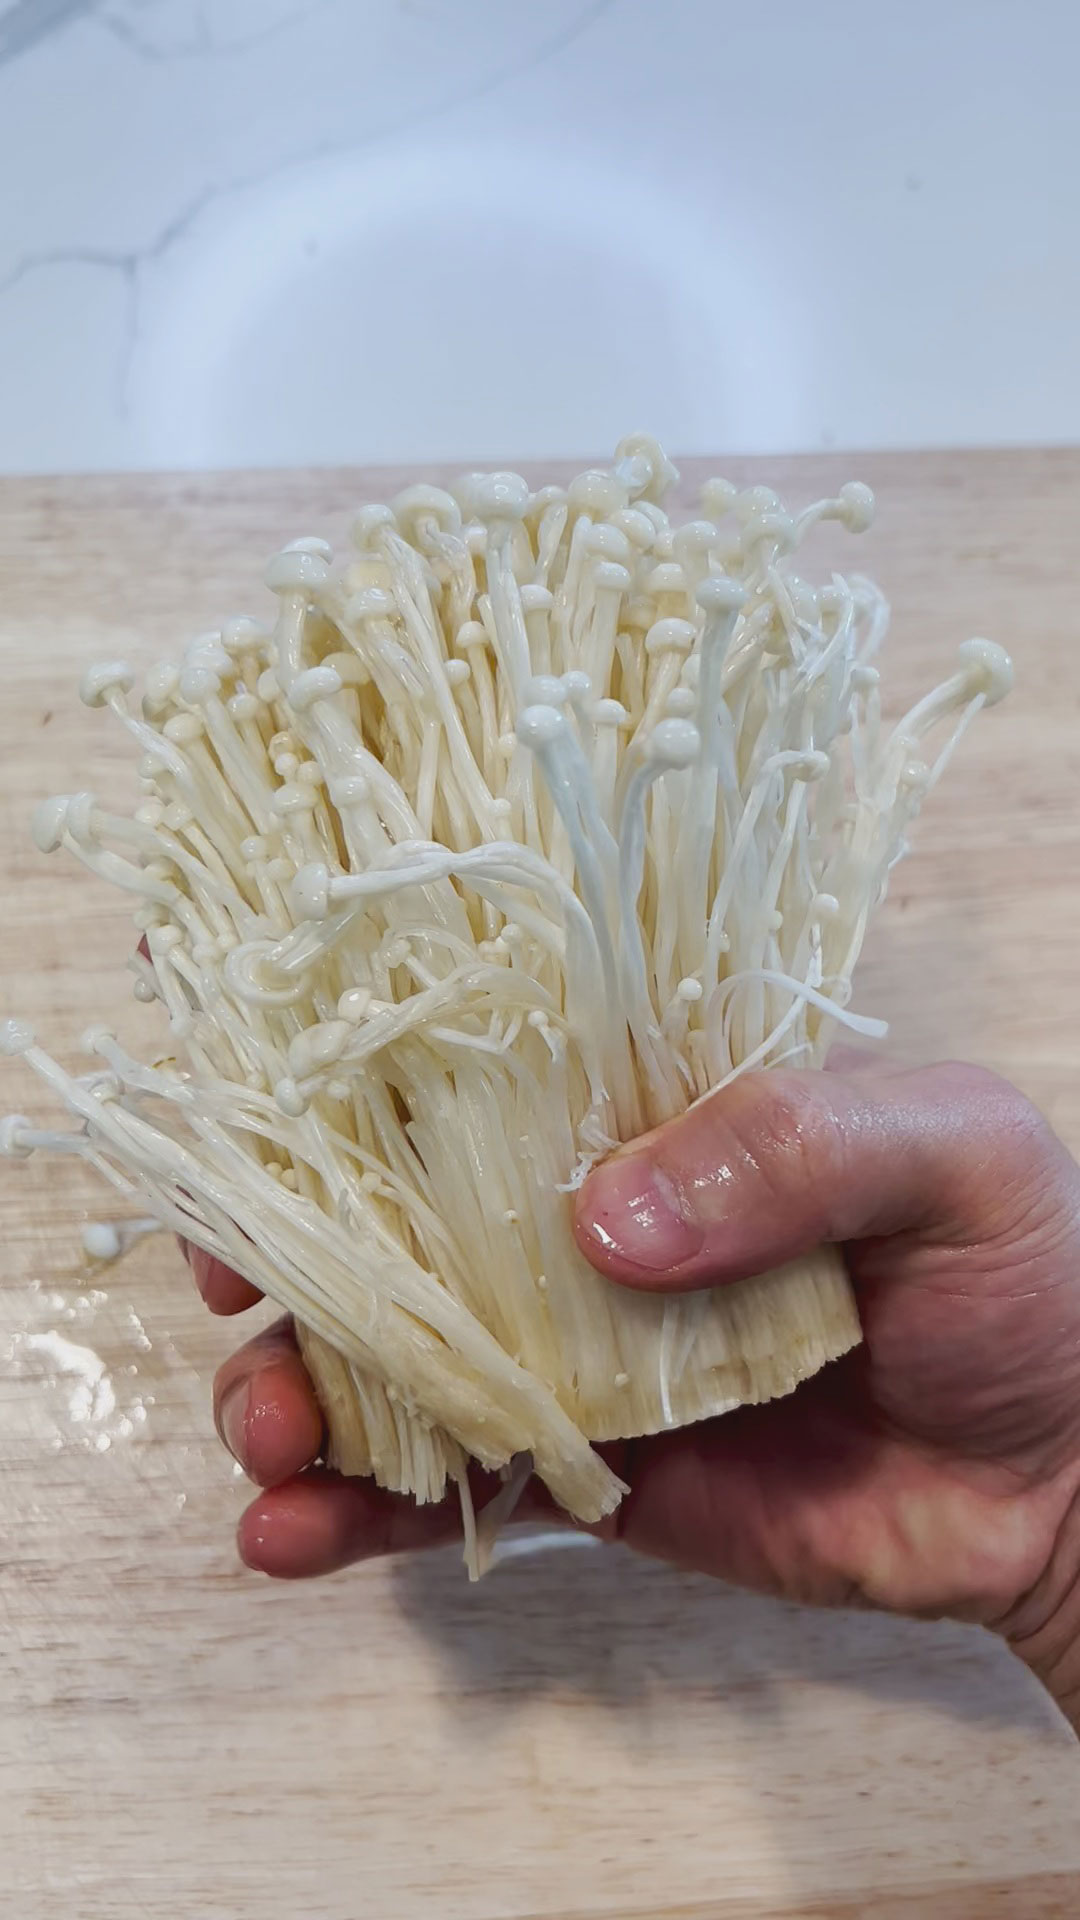 Trimmed and washed enoki mushrooms